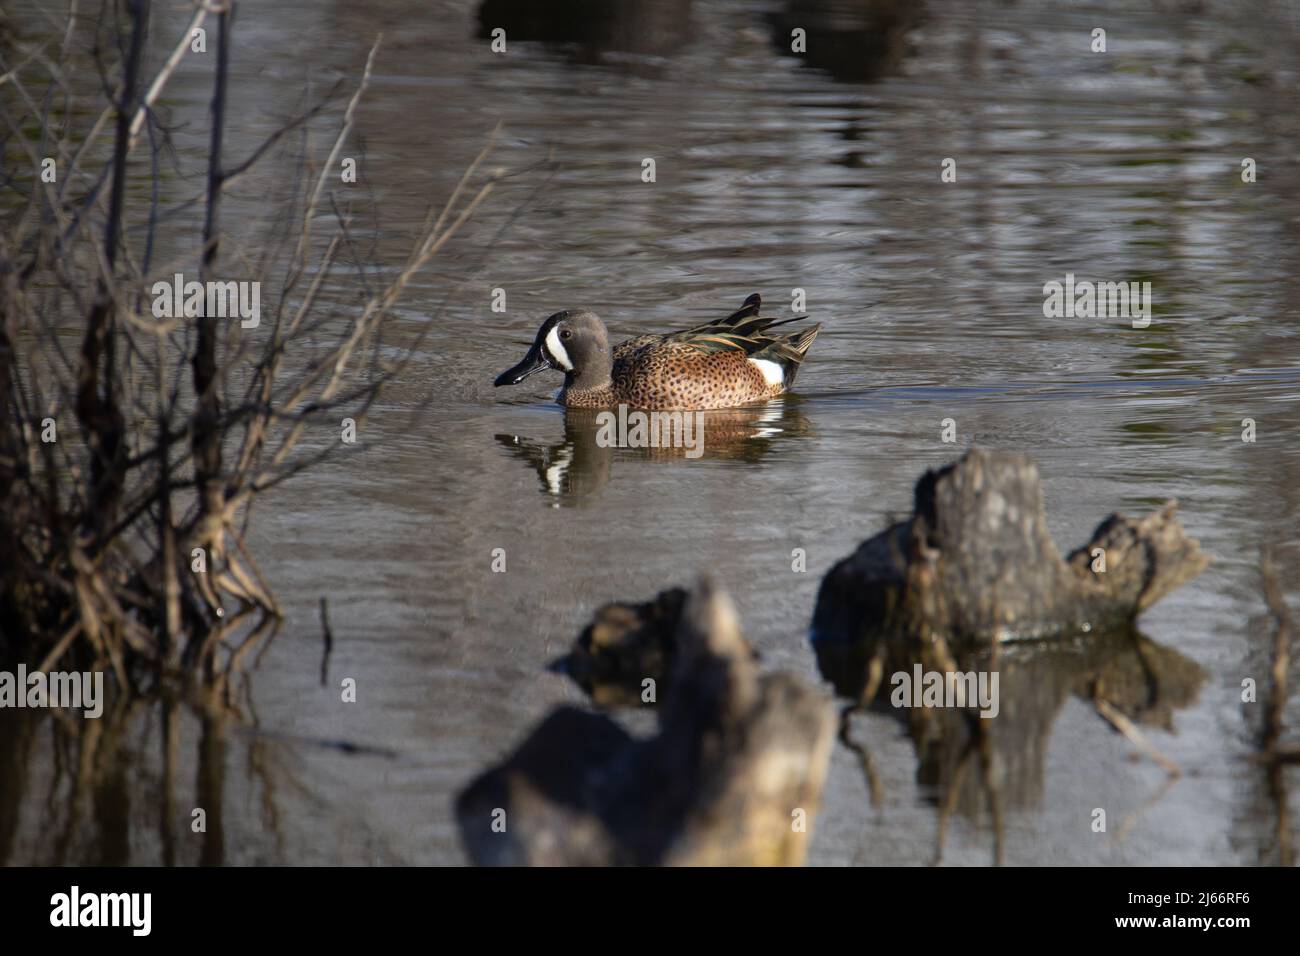 Blue-winged teal (Spatula discors) blue winged teal duck swimming with reflection and stumps in the foreground Stock Photo